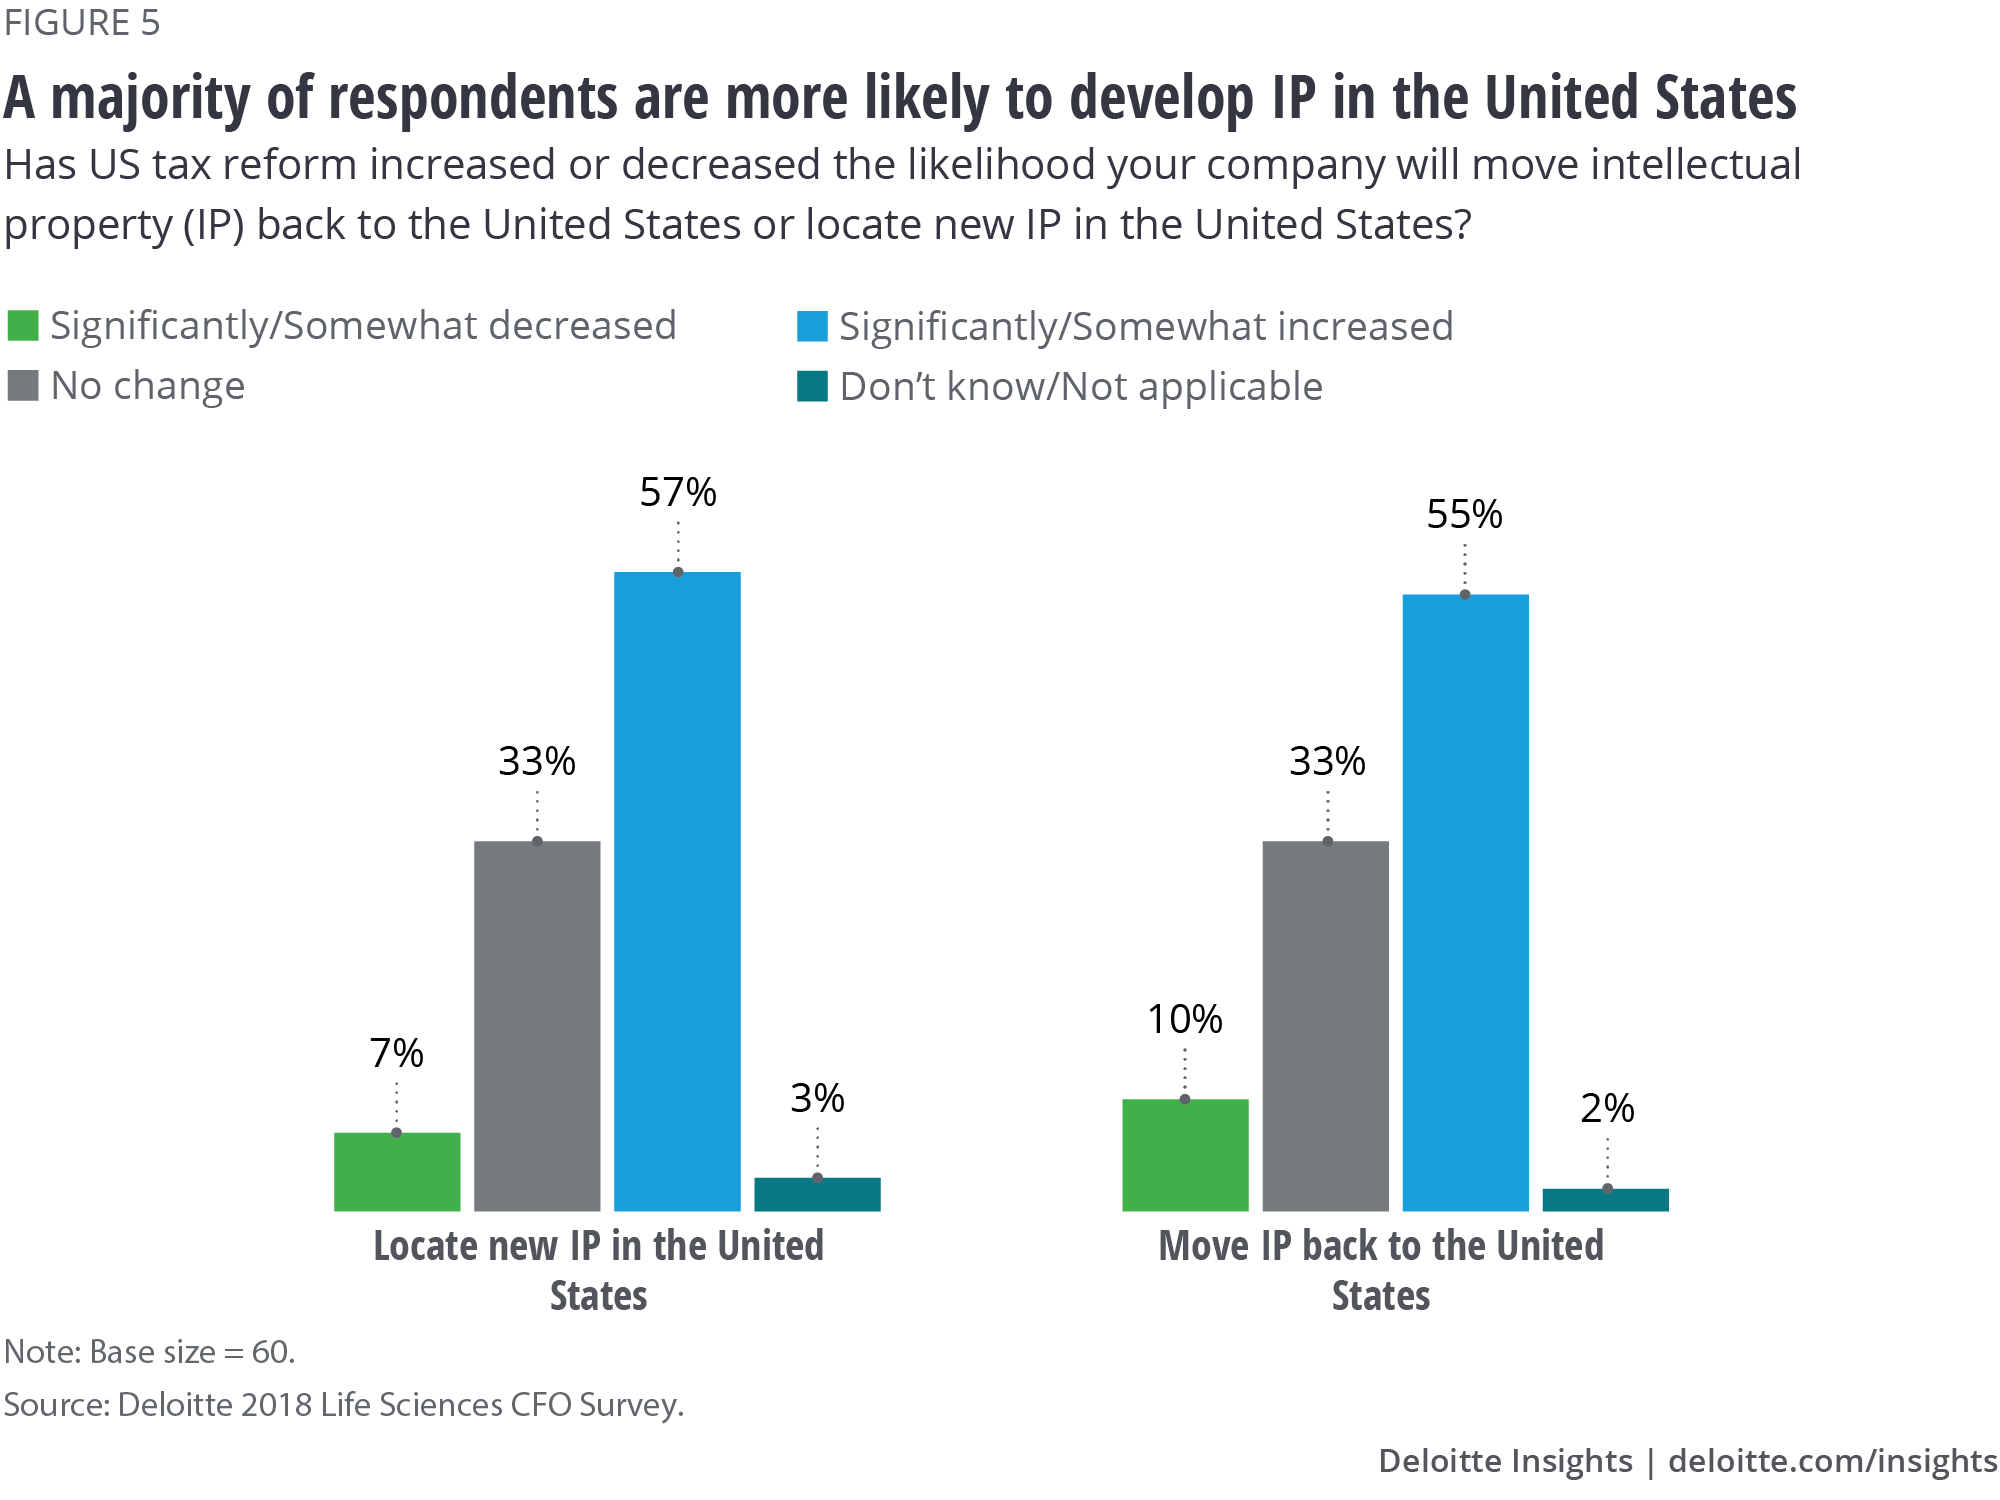 A majority of respondents are more likely to develop IP in the United States